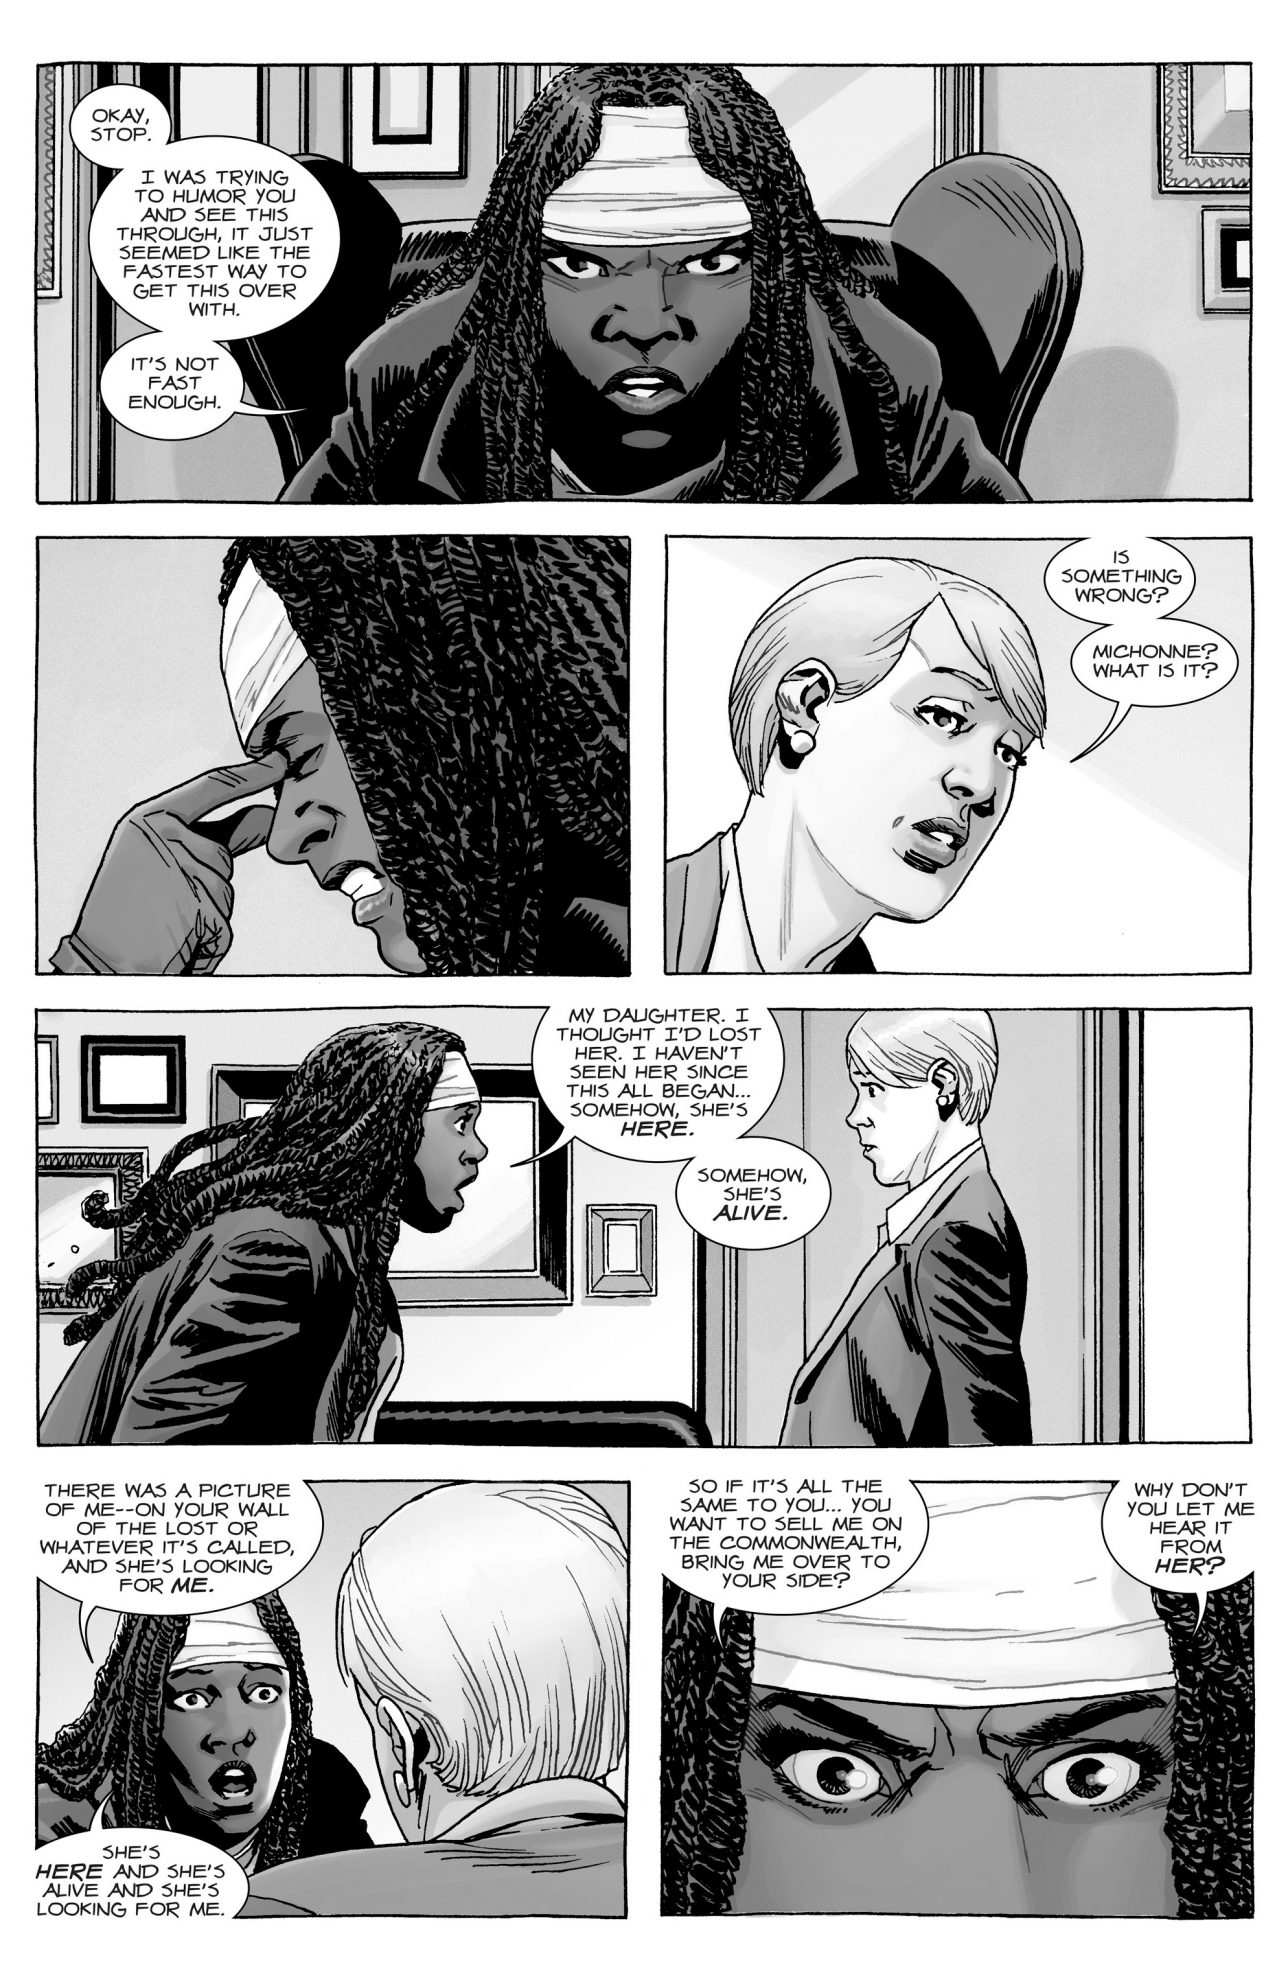 Michonne's Reunion With Her Lost Kid (The Walking Dead)